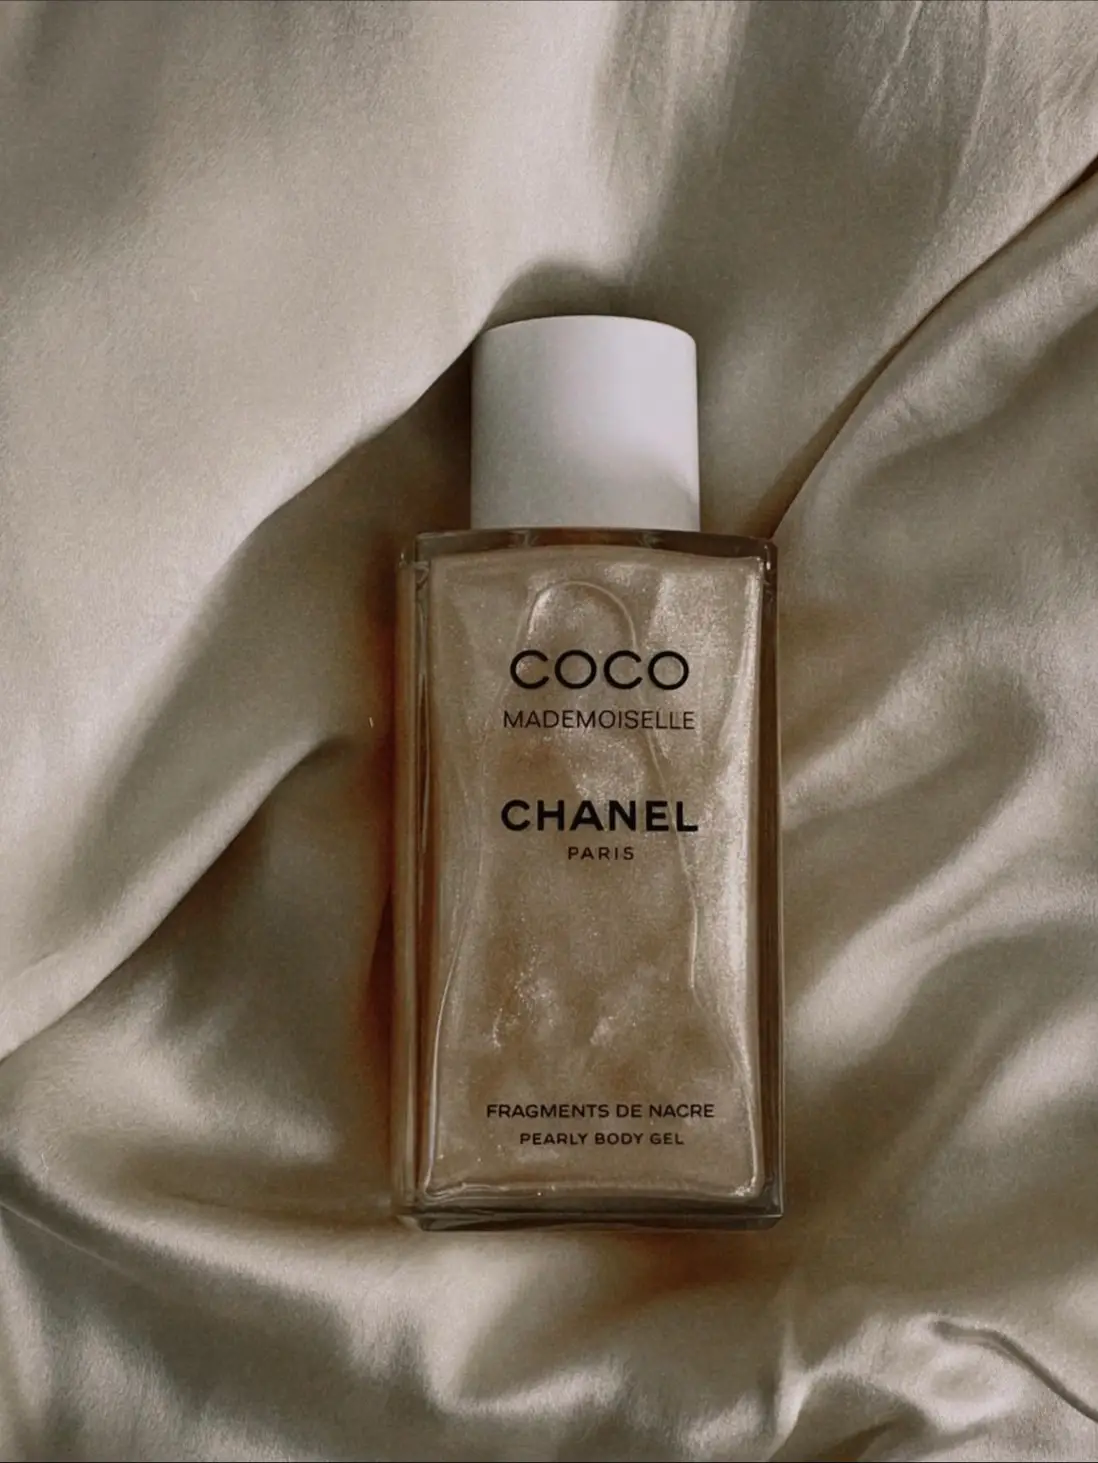 Chanel COCO MADEMOISELLE Pearly Body Gel 8.4 oz / 250 ml NEW IN BOX  authentic